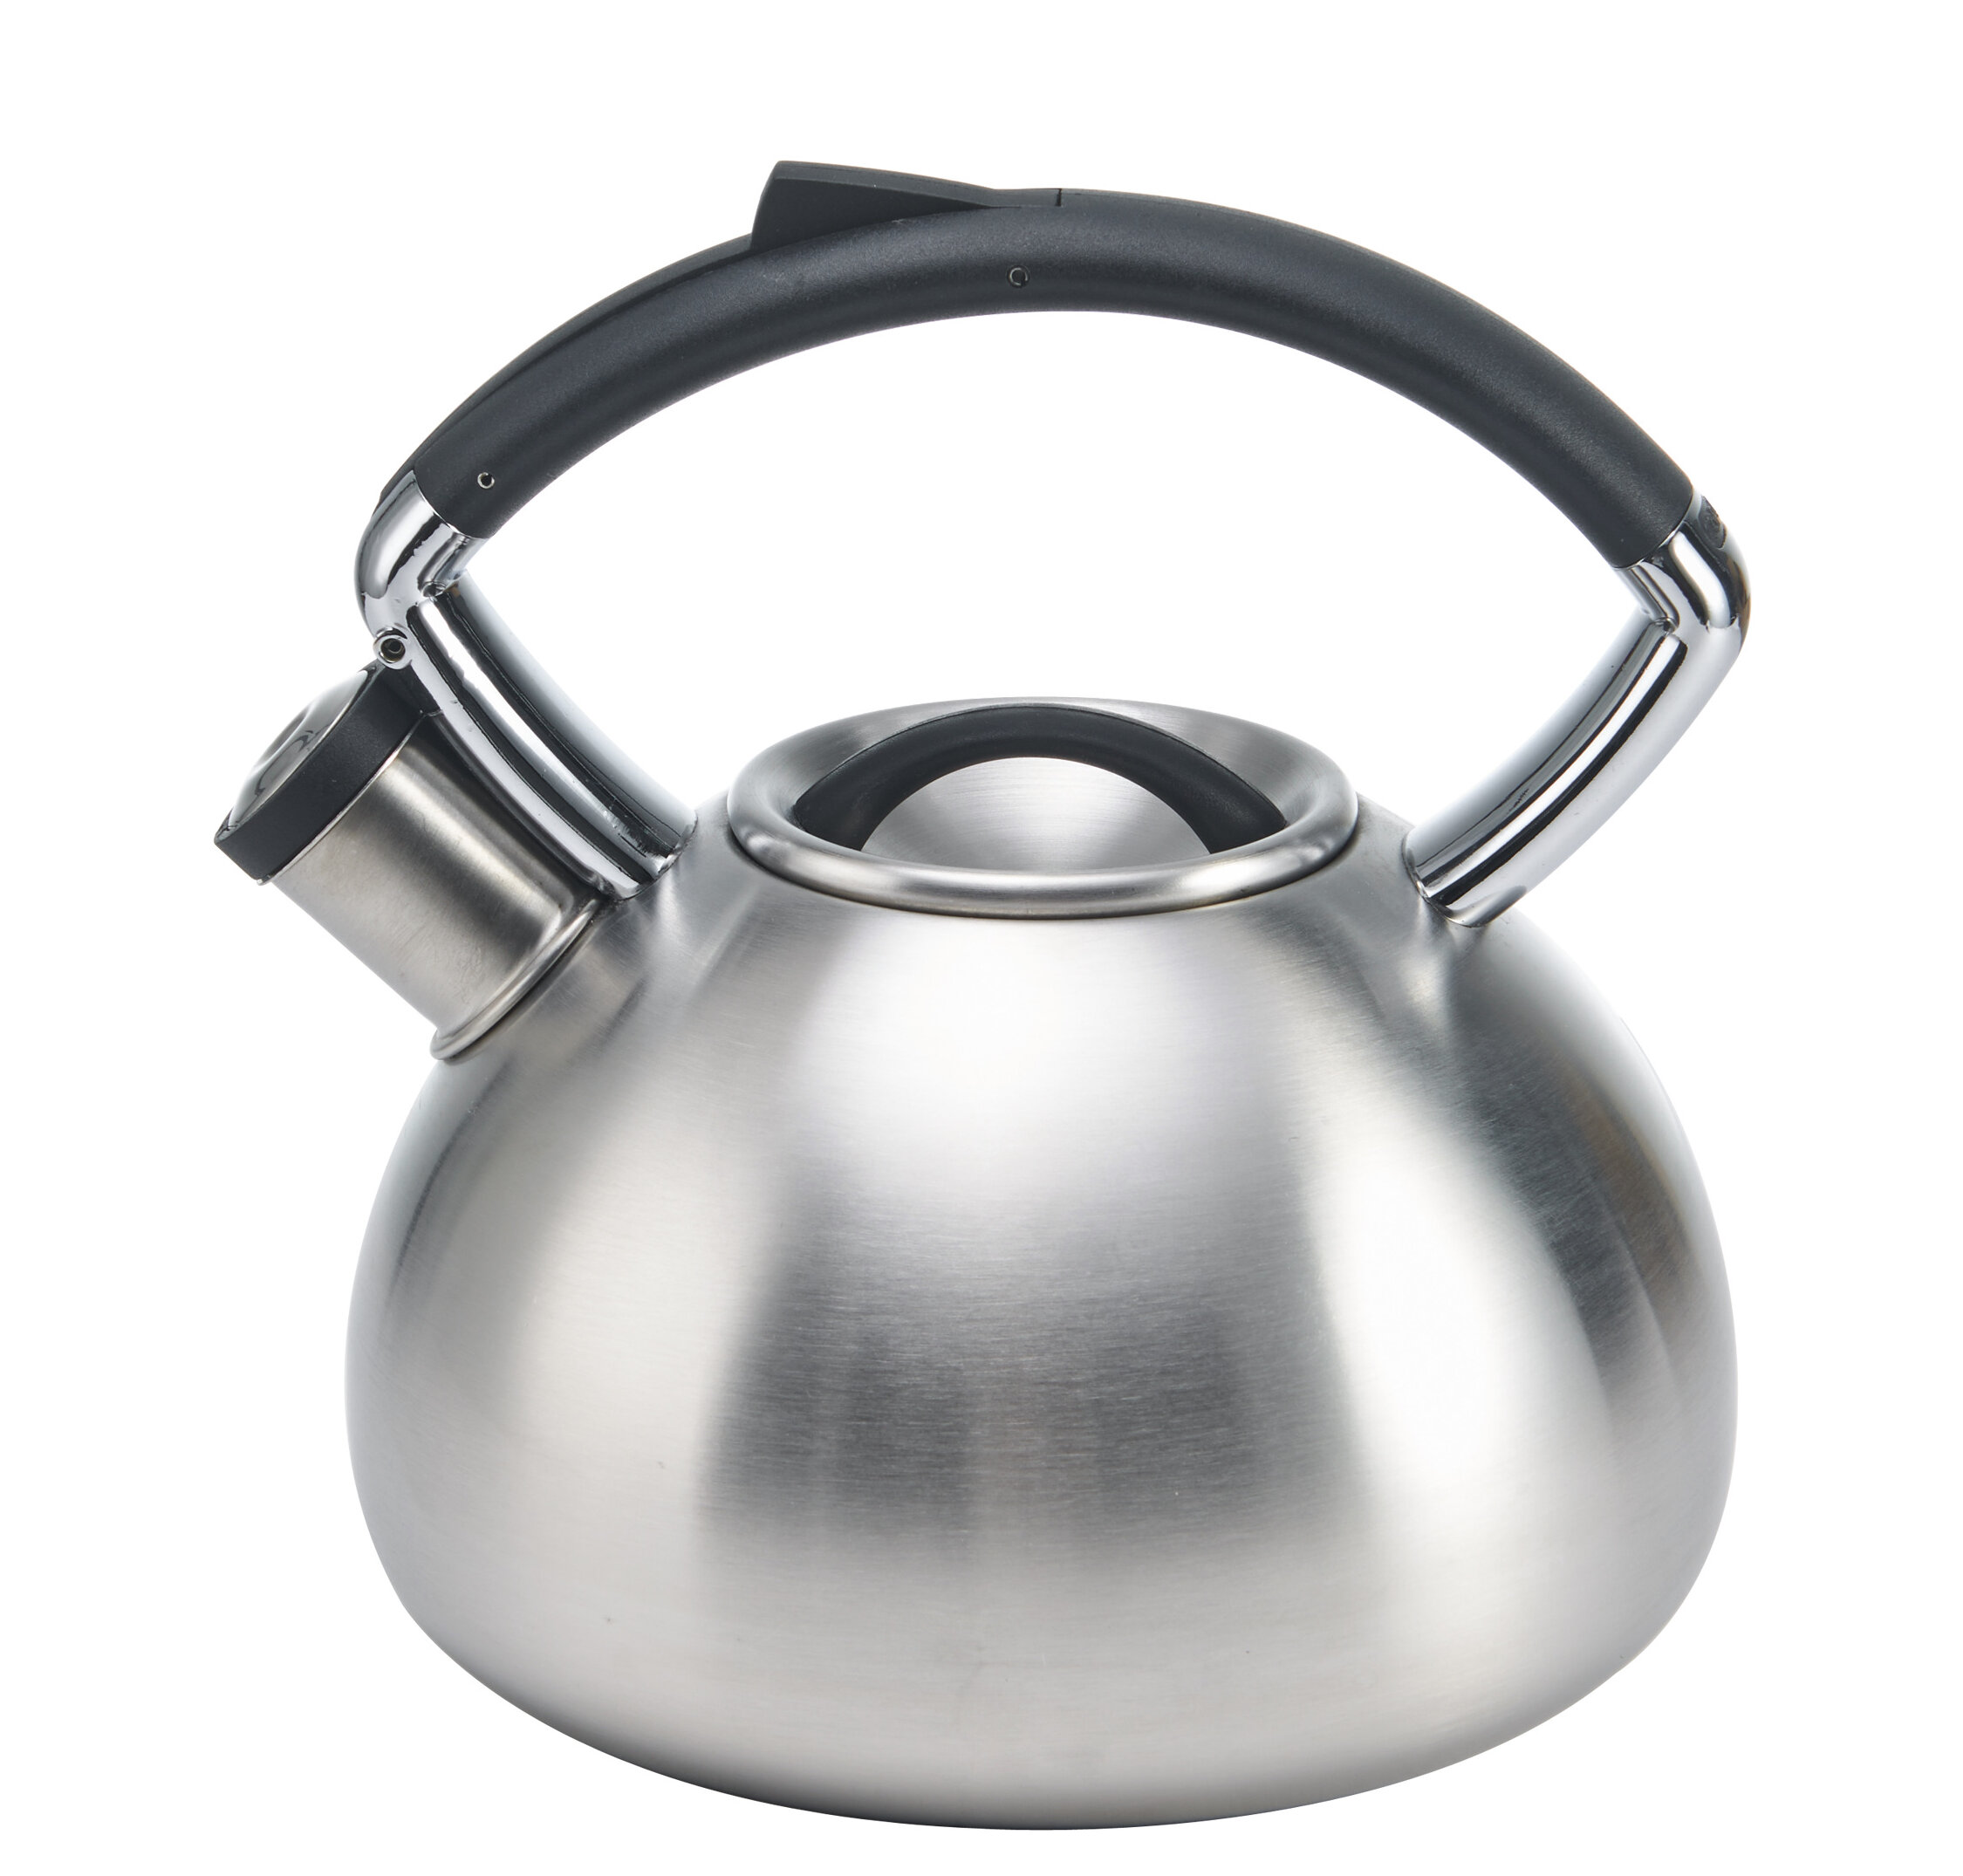 Copco 2503-0300 Kettering Brushed Stainless Steel Tea Kettle 1.3 Quart 